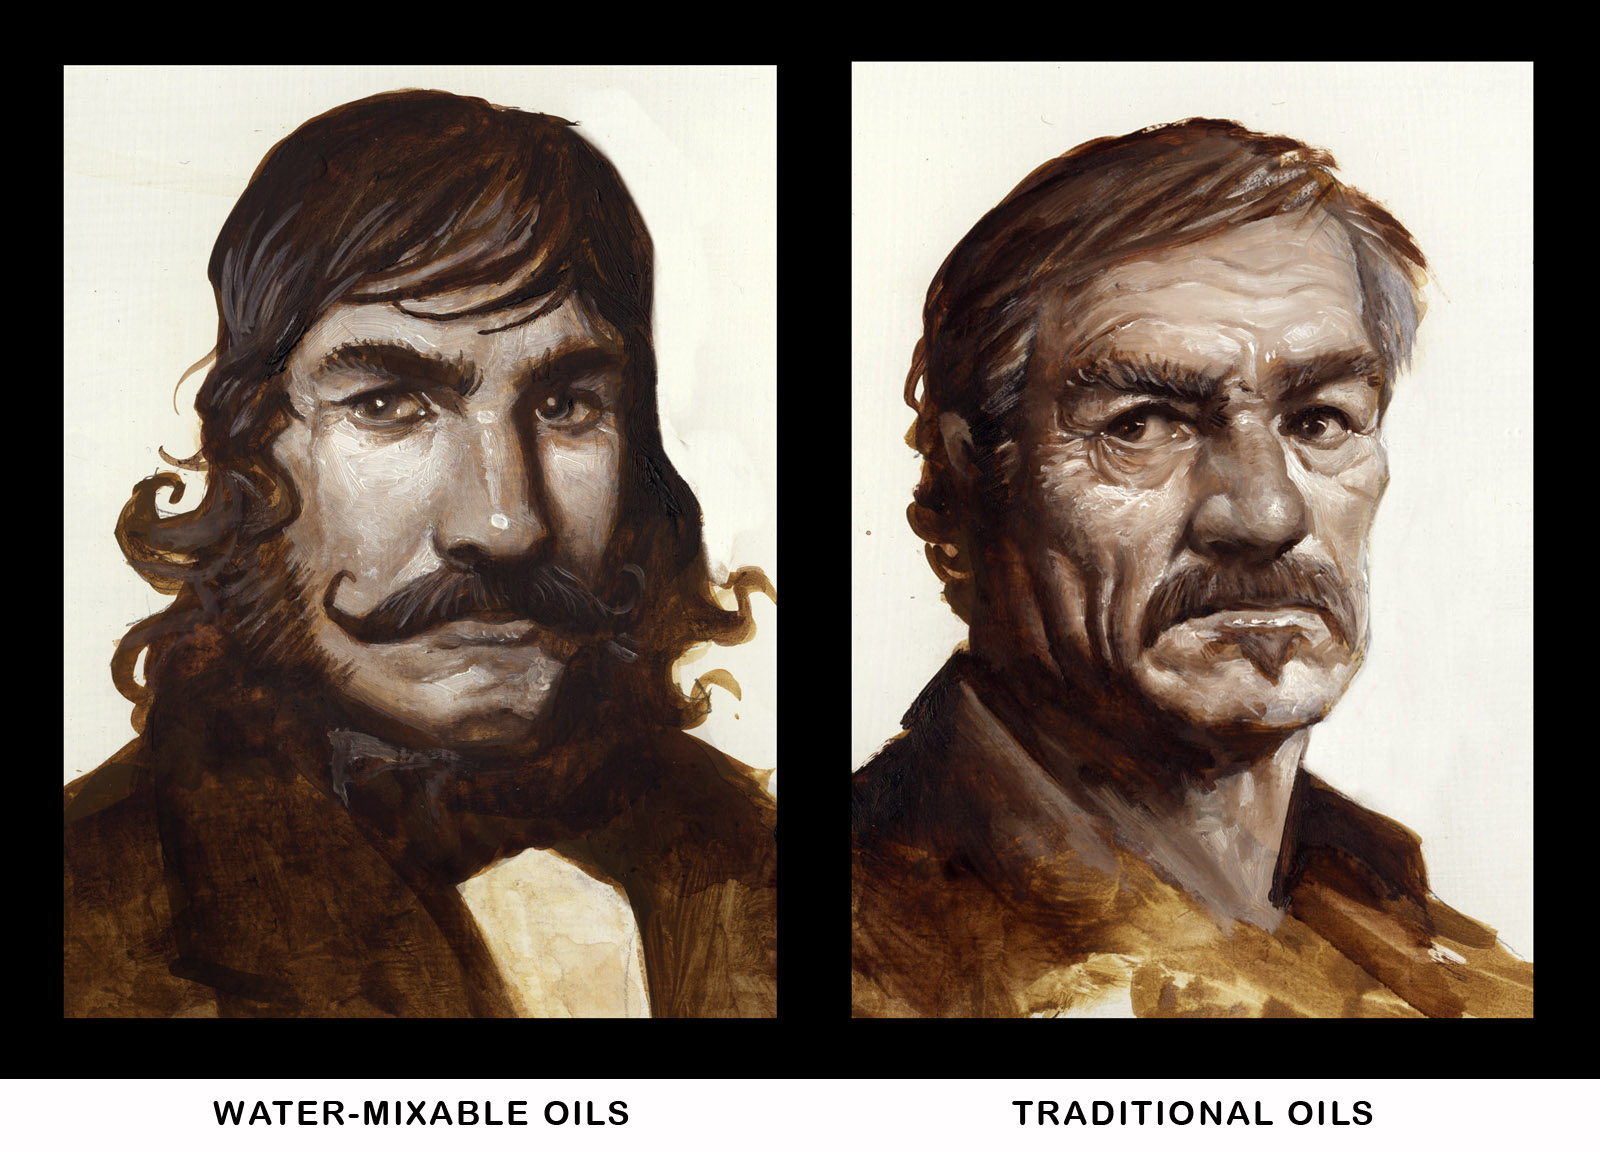 New-fangled Water-Mixable Oils vs. Old, Reliable Traditional Oils